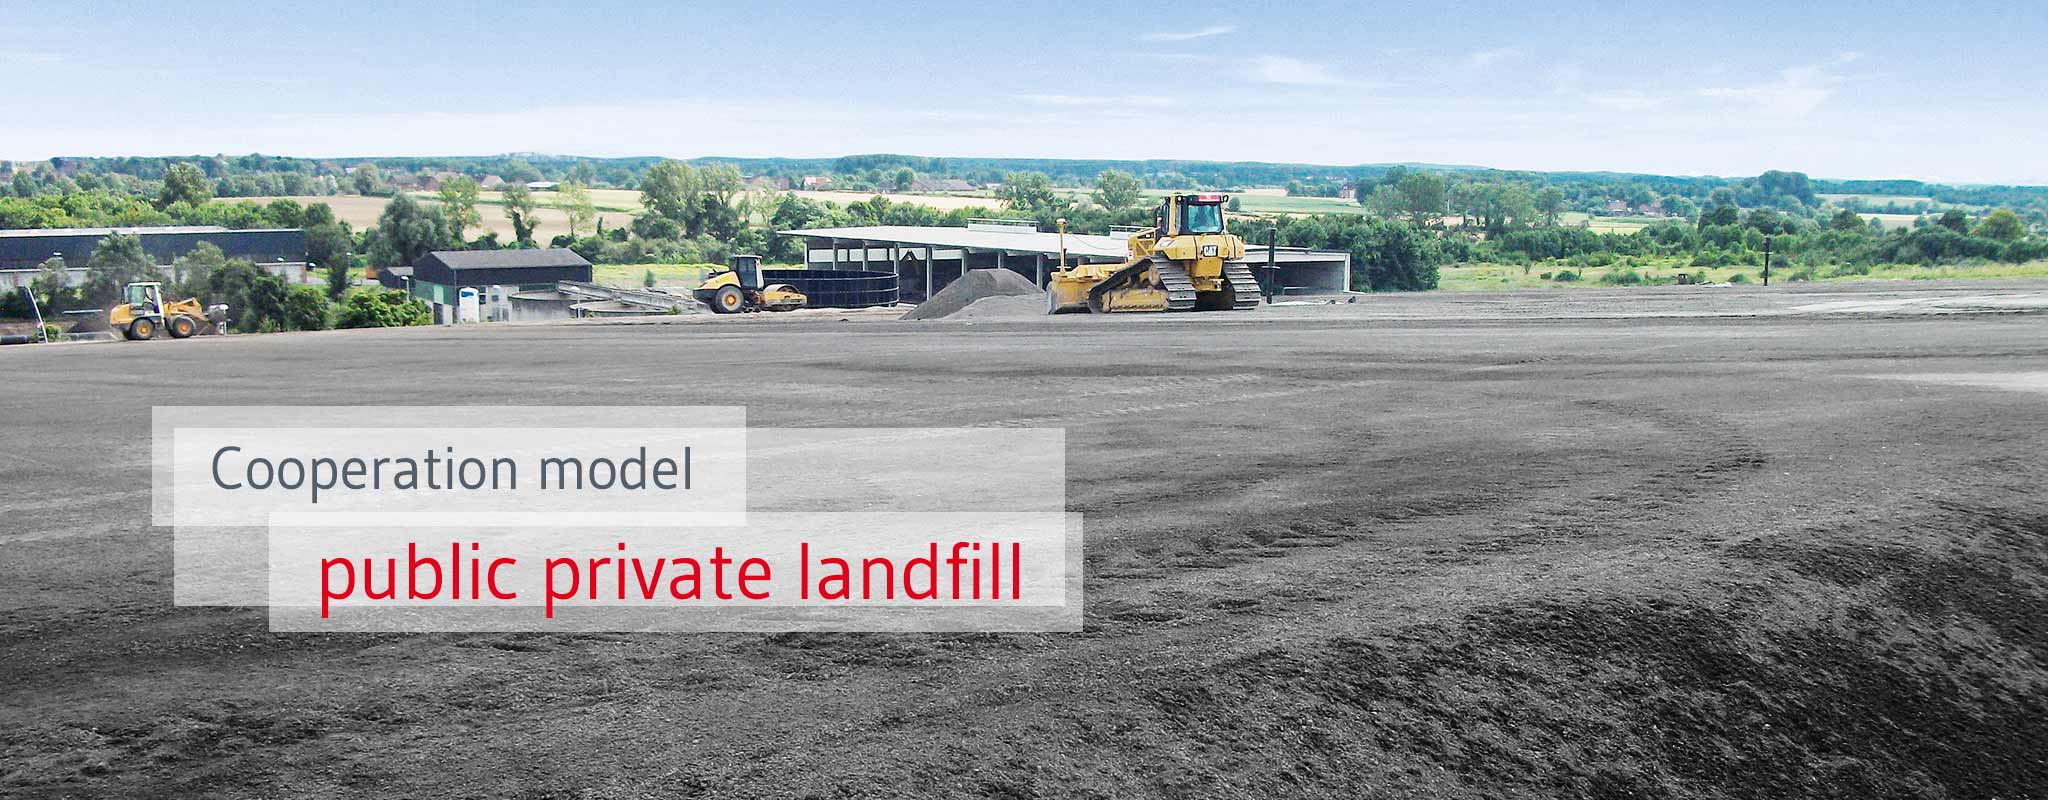 Collaboration on landfill projects with prepaid landfill